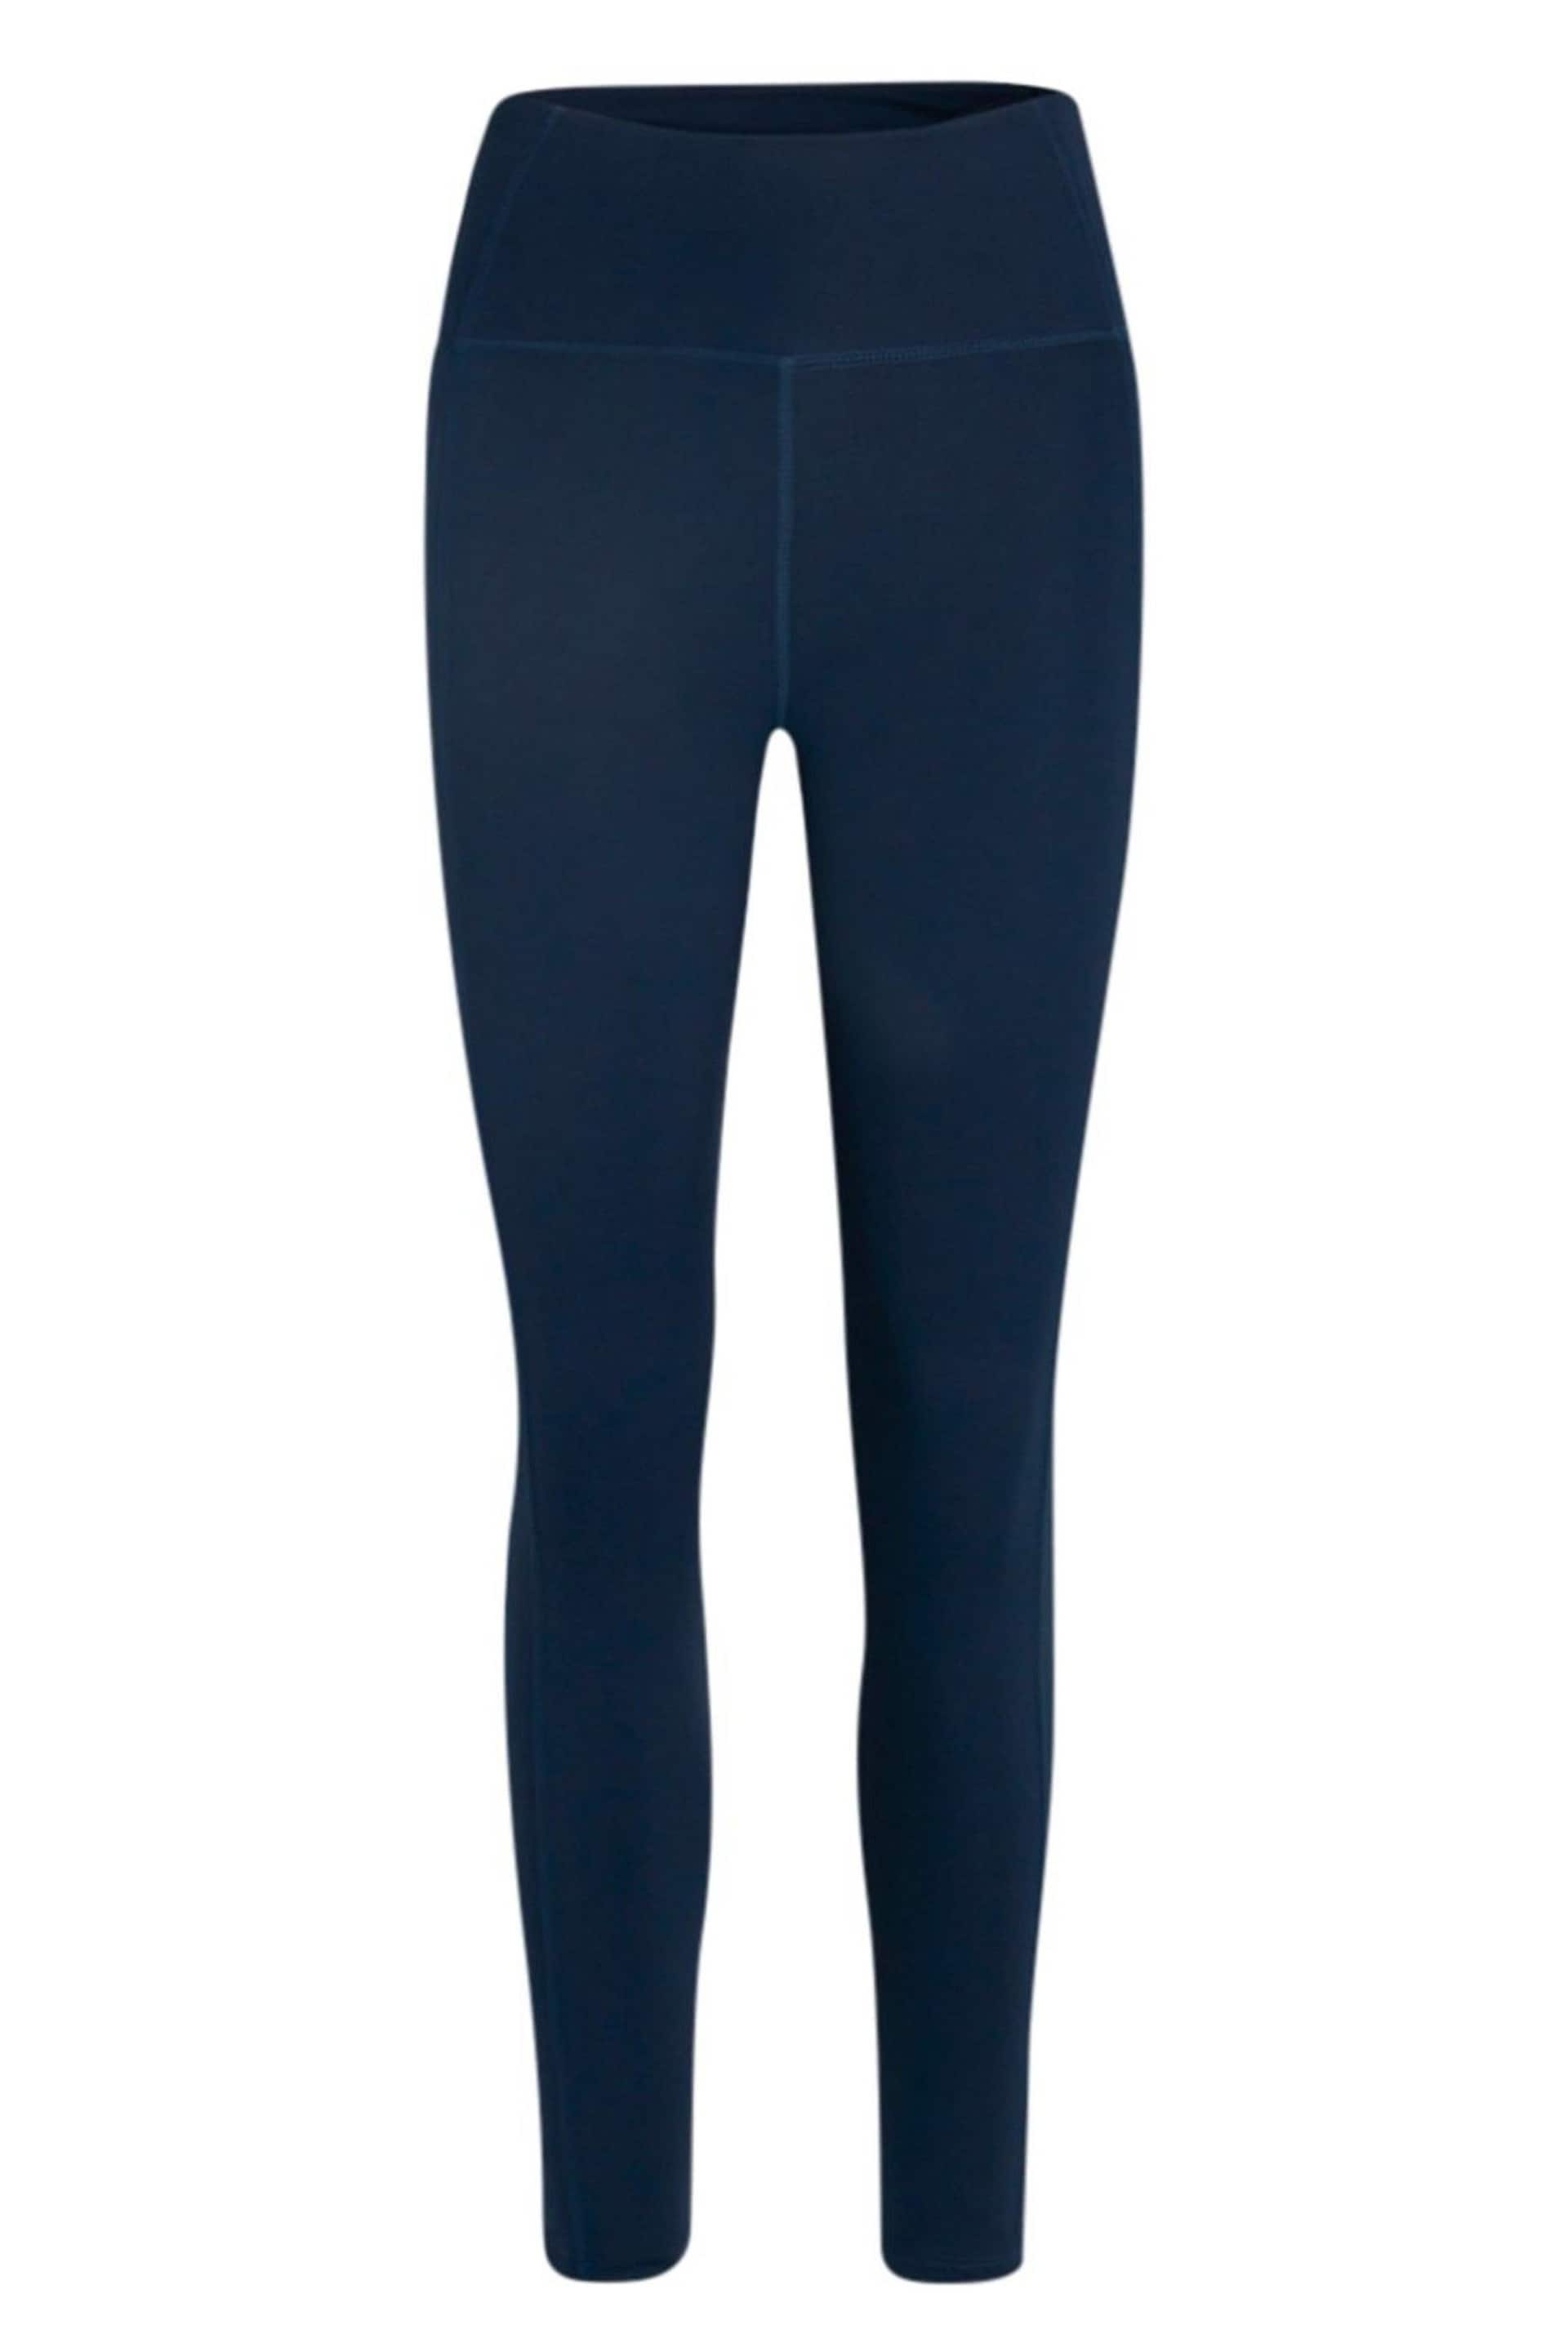 Girlfriend Collective High Rise Pocket Leggings - Image 6 of 8